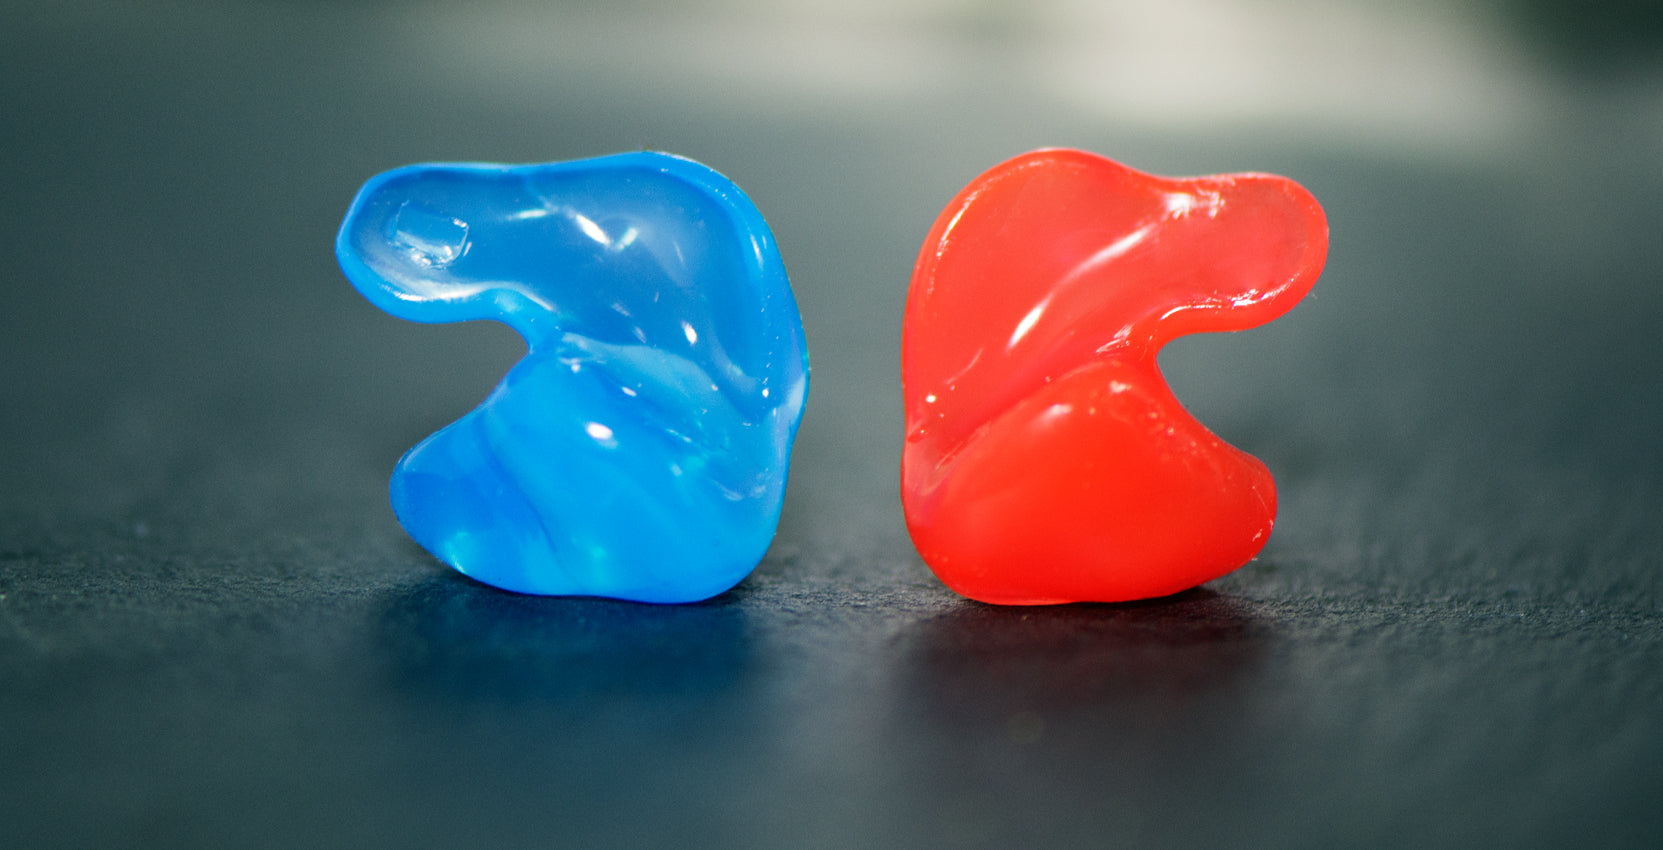 Two vibrant, translucent earplugs, one blue and one red, placed on a gray surface, captured in close-up showcasing their squishy texture.